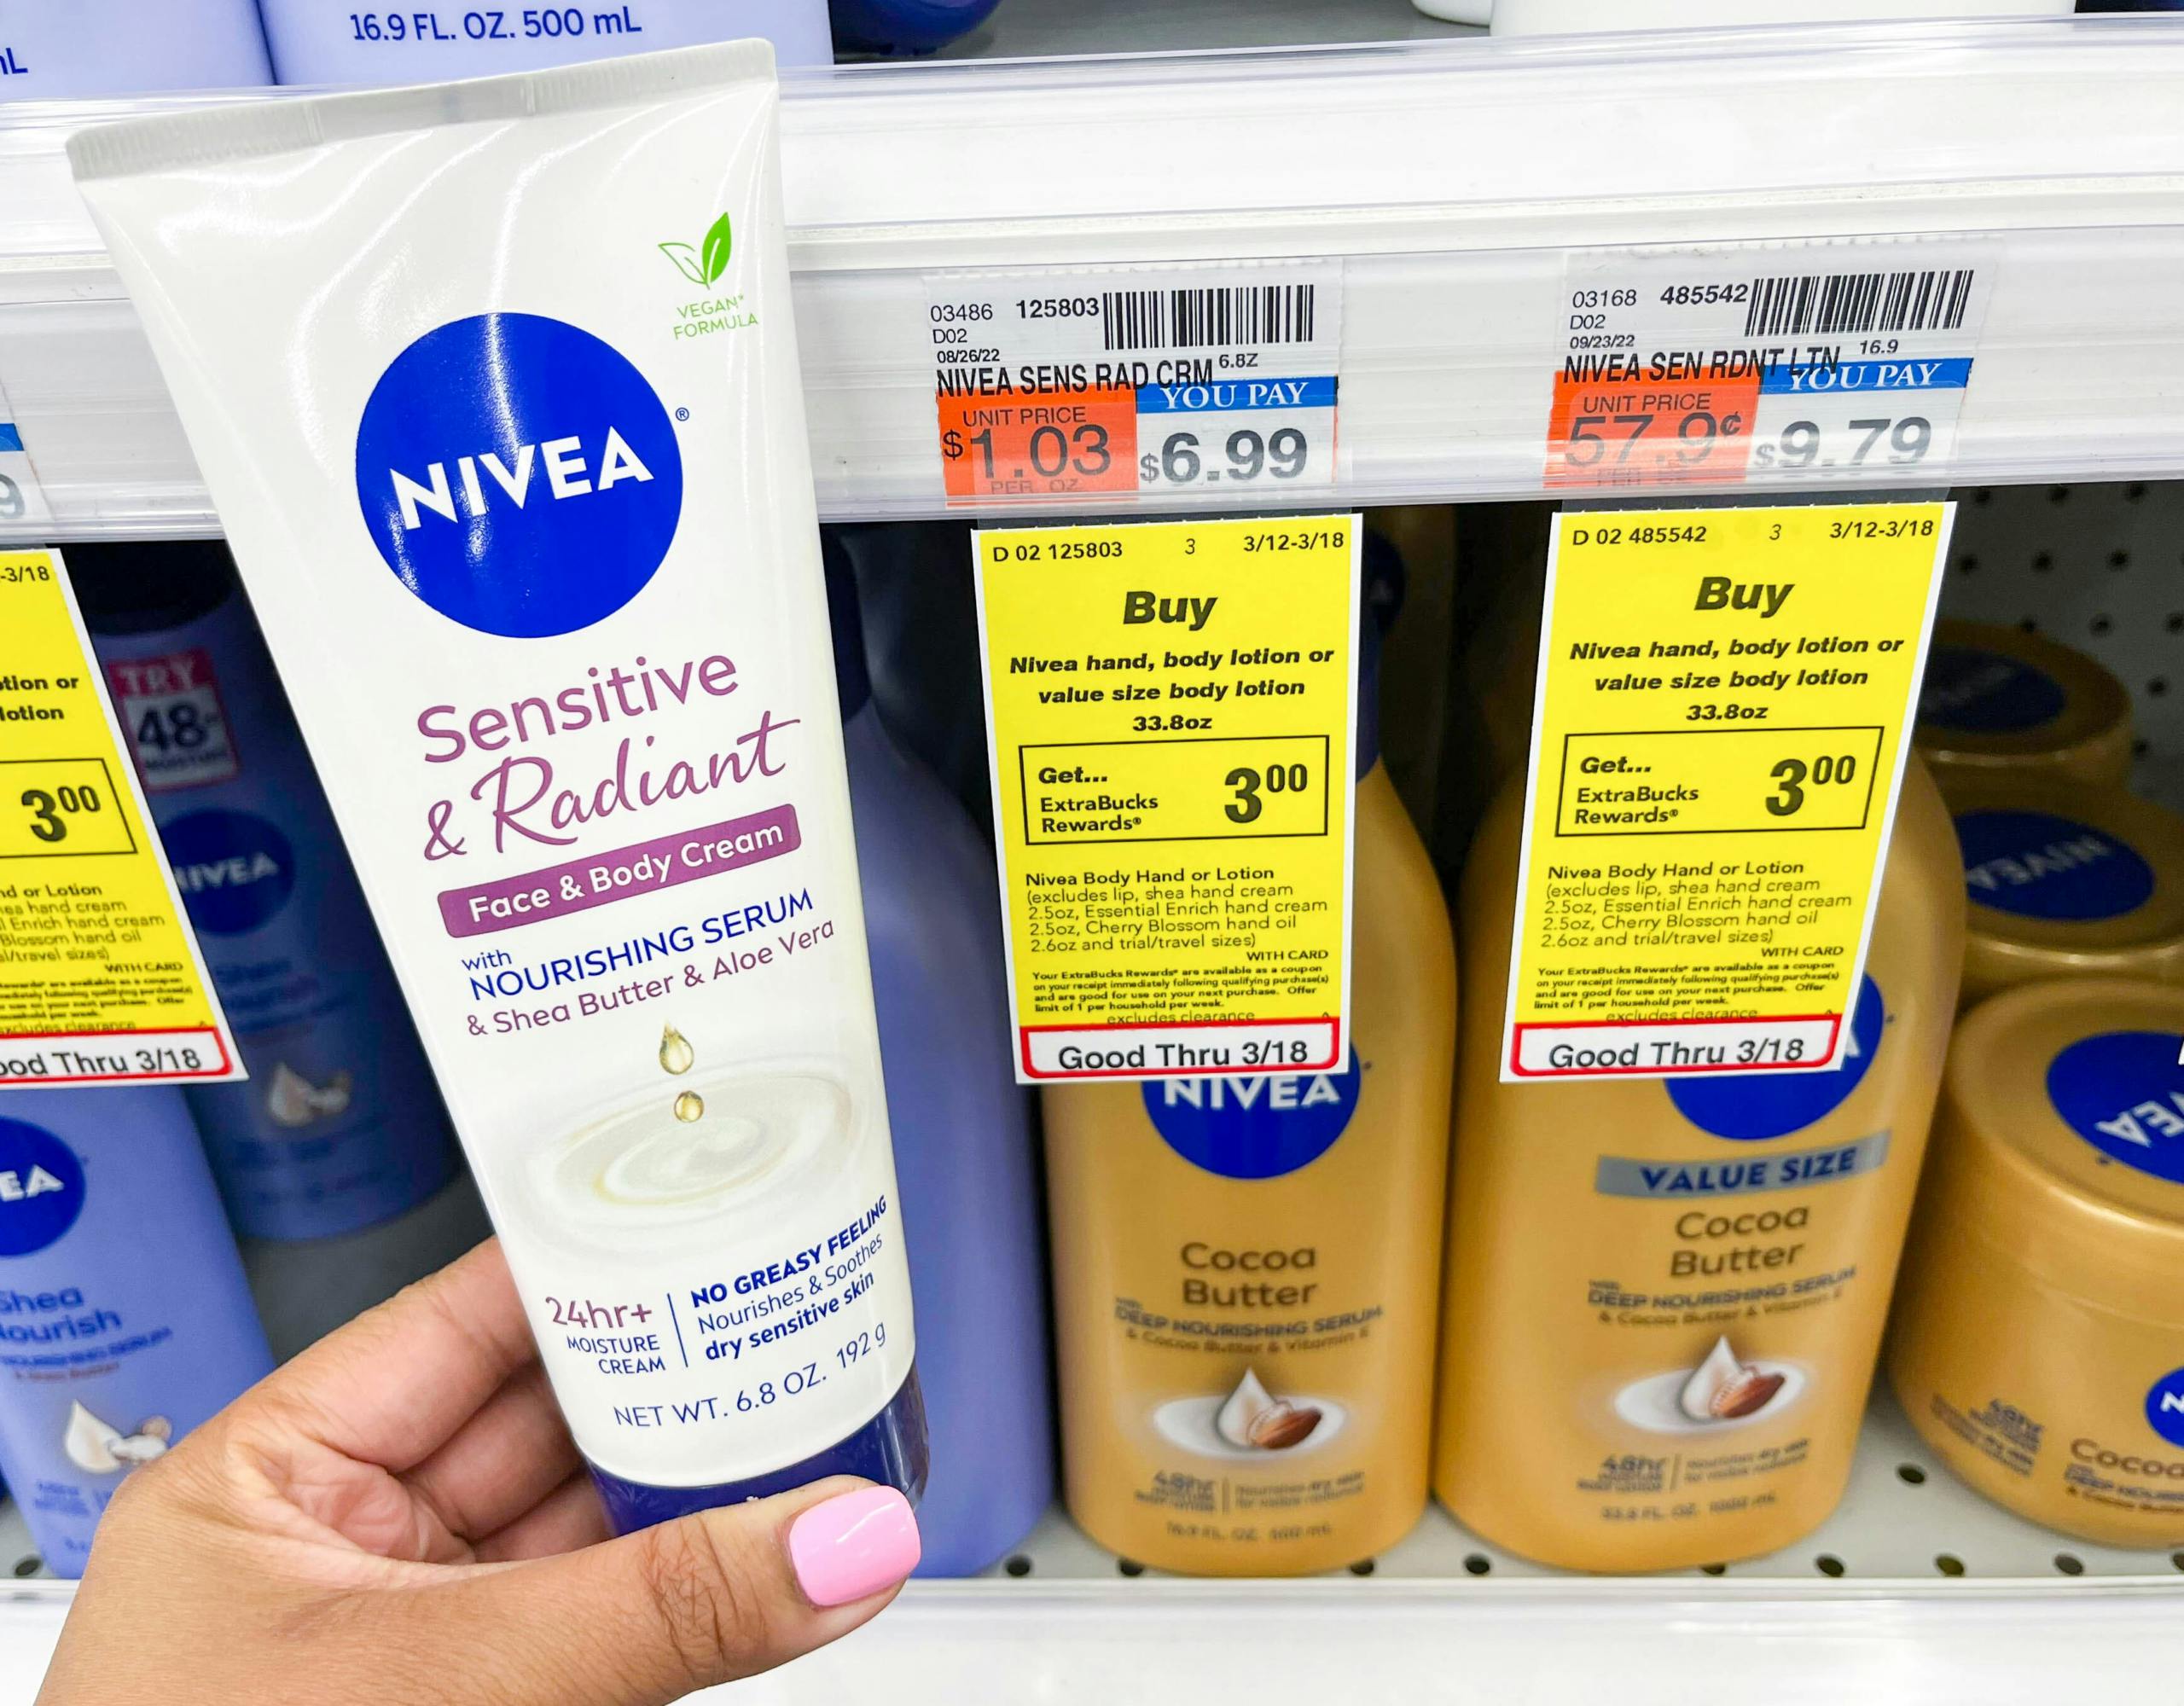 hand holding bottle of Nivea cream next to sales tag